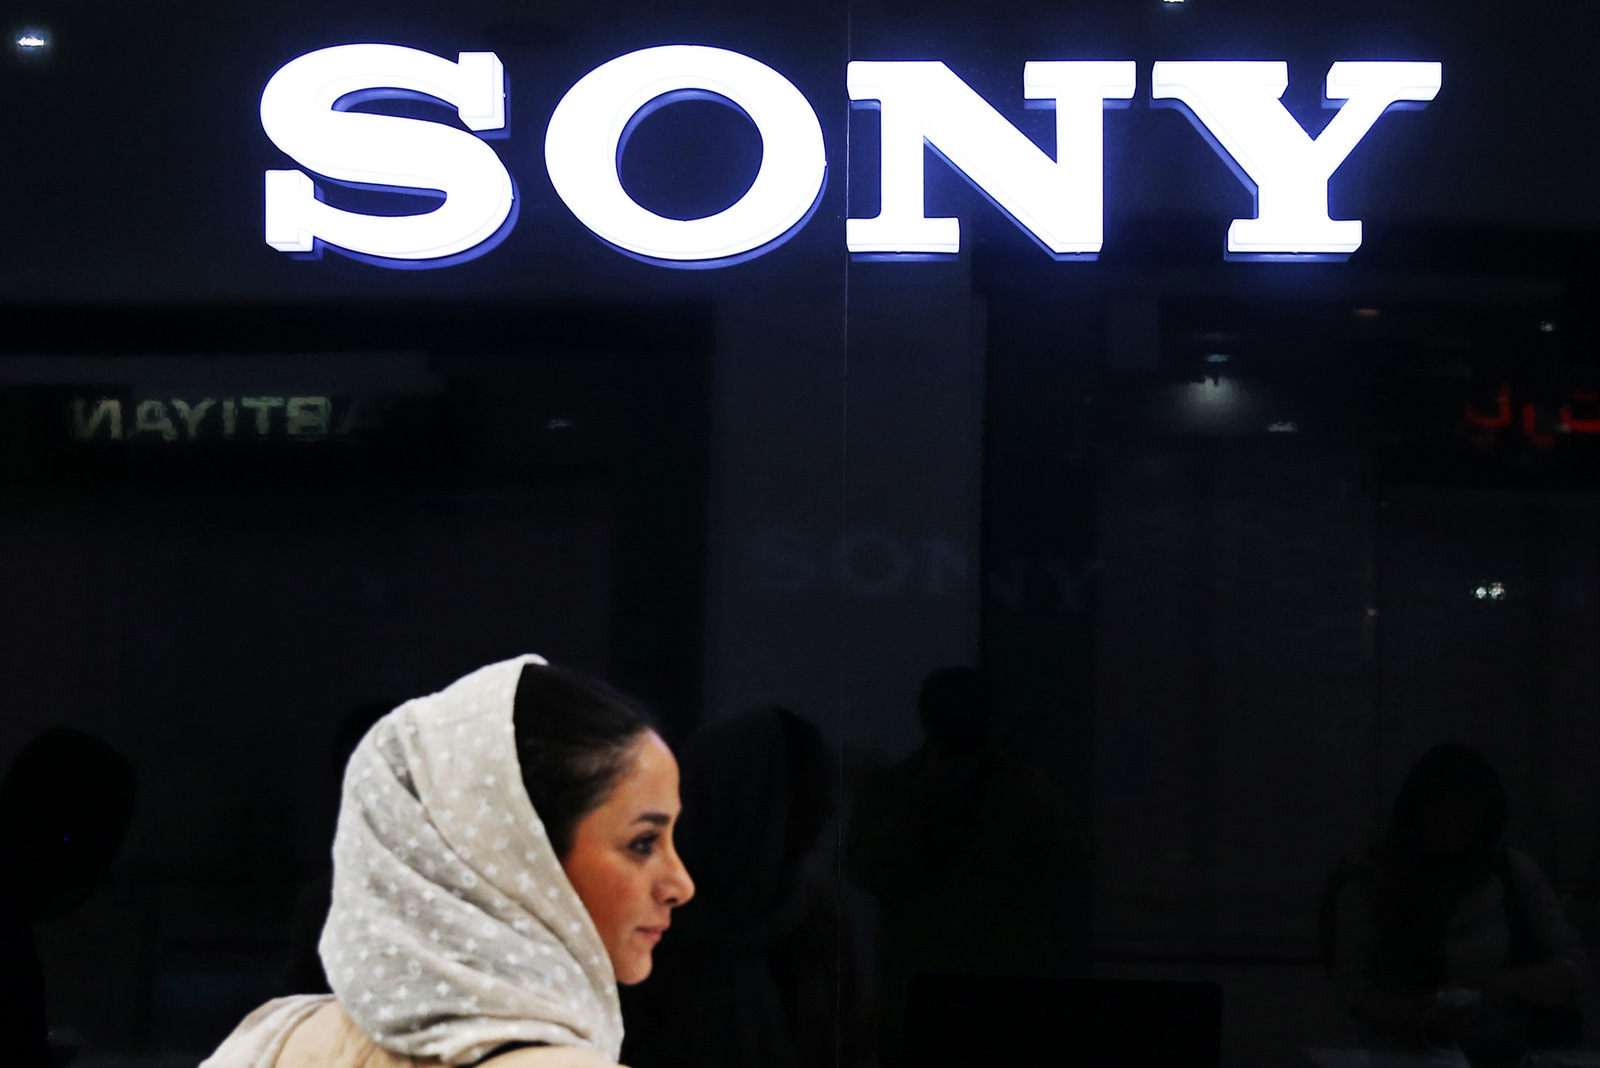 In this picture taken on Friday, July 17, 2015, an Iranian woman walks past a Sony dealer at a shopping center in downtown Tehran, Iran. While it will likely be months before sanctions on Iran ease, business and political leaders are wasting no time in trying to tap into a large and what they hope will be a lucrative Iranian market. Ads for European cars and luxury goods are starting to reappear in Tehran. (AP Photo/Ebrahim Noroozi)